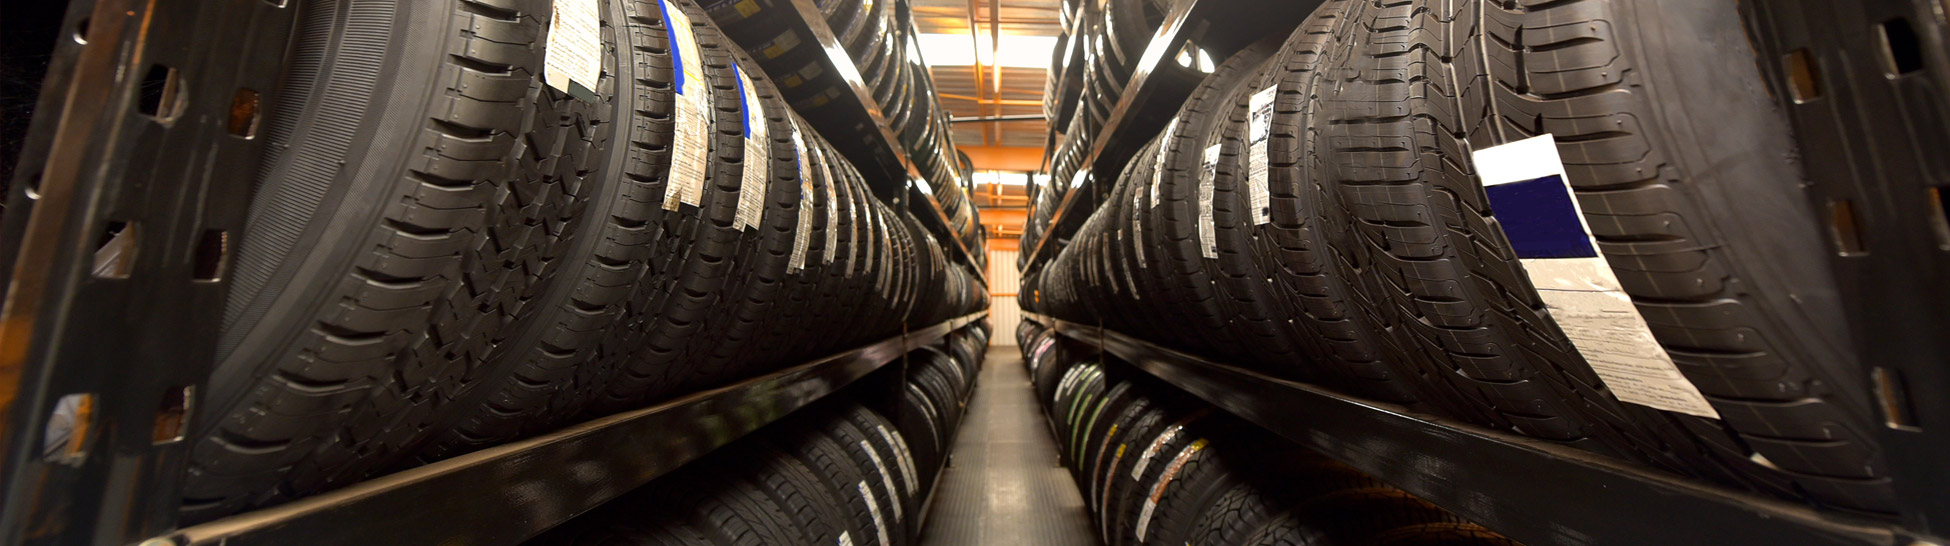 Rows of Tires at a Tire Shop